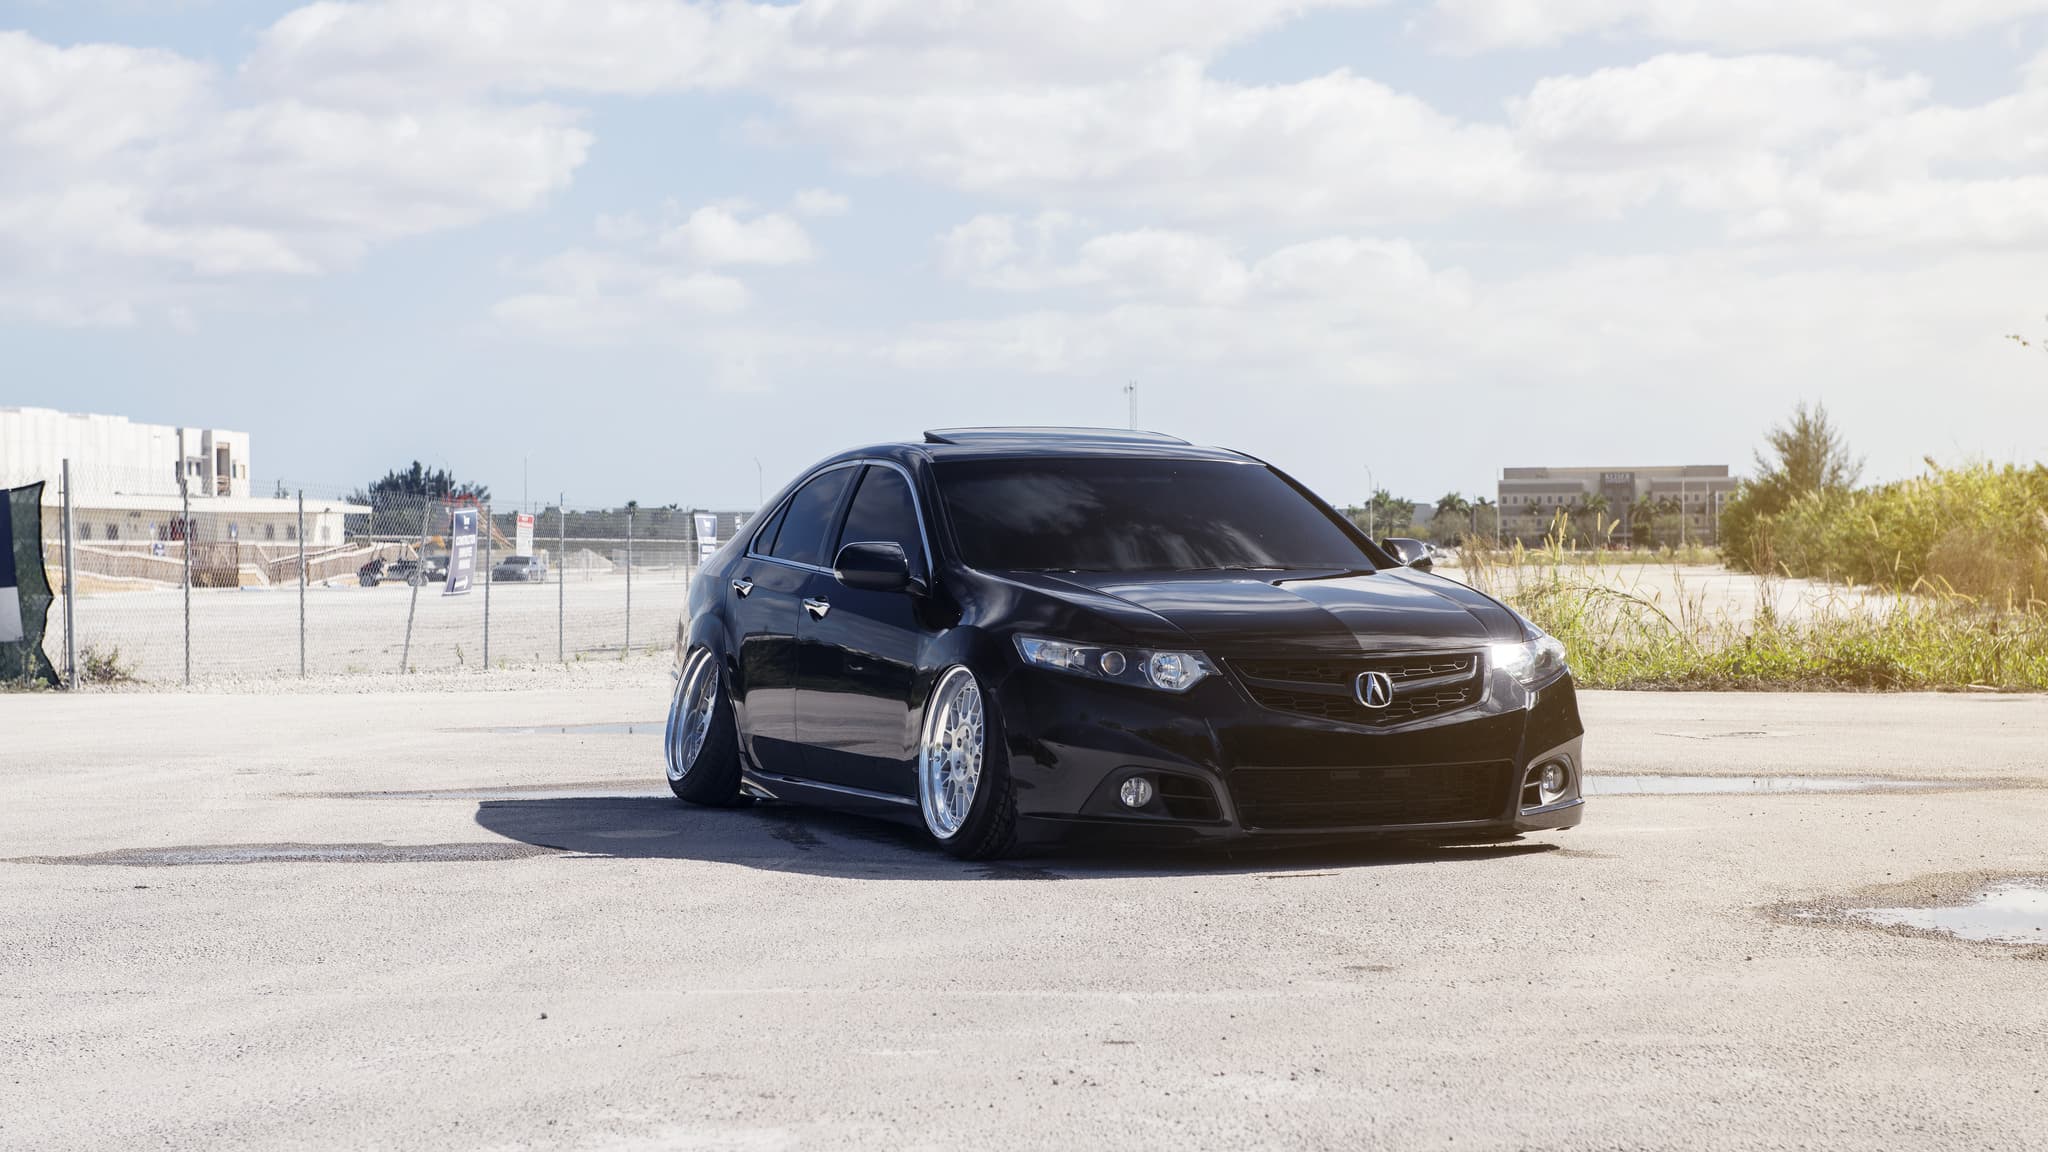 Acura Tsx Wallpapers